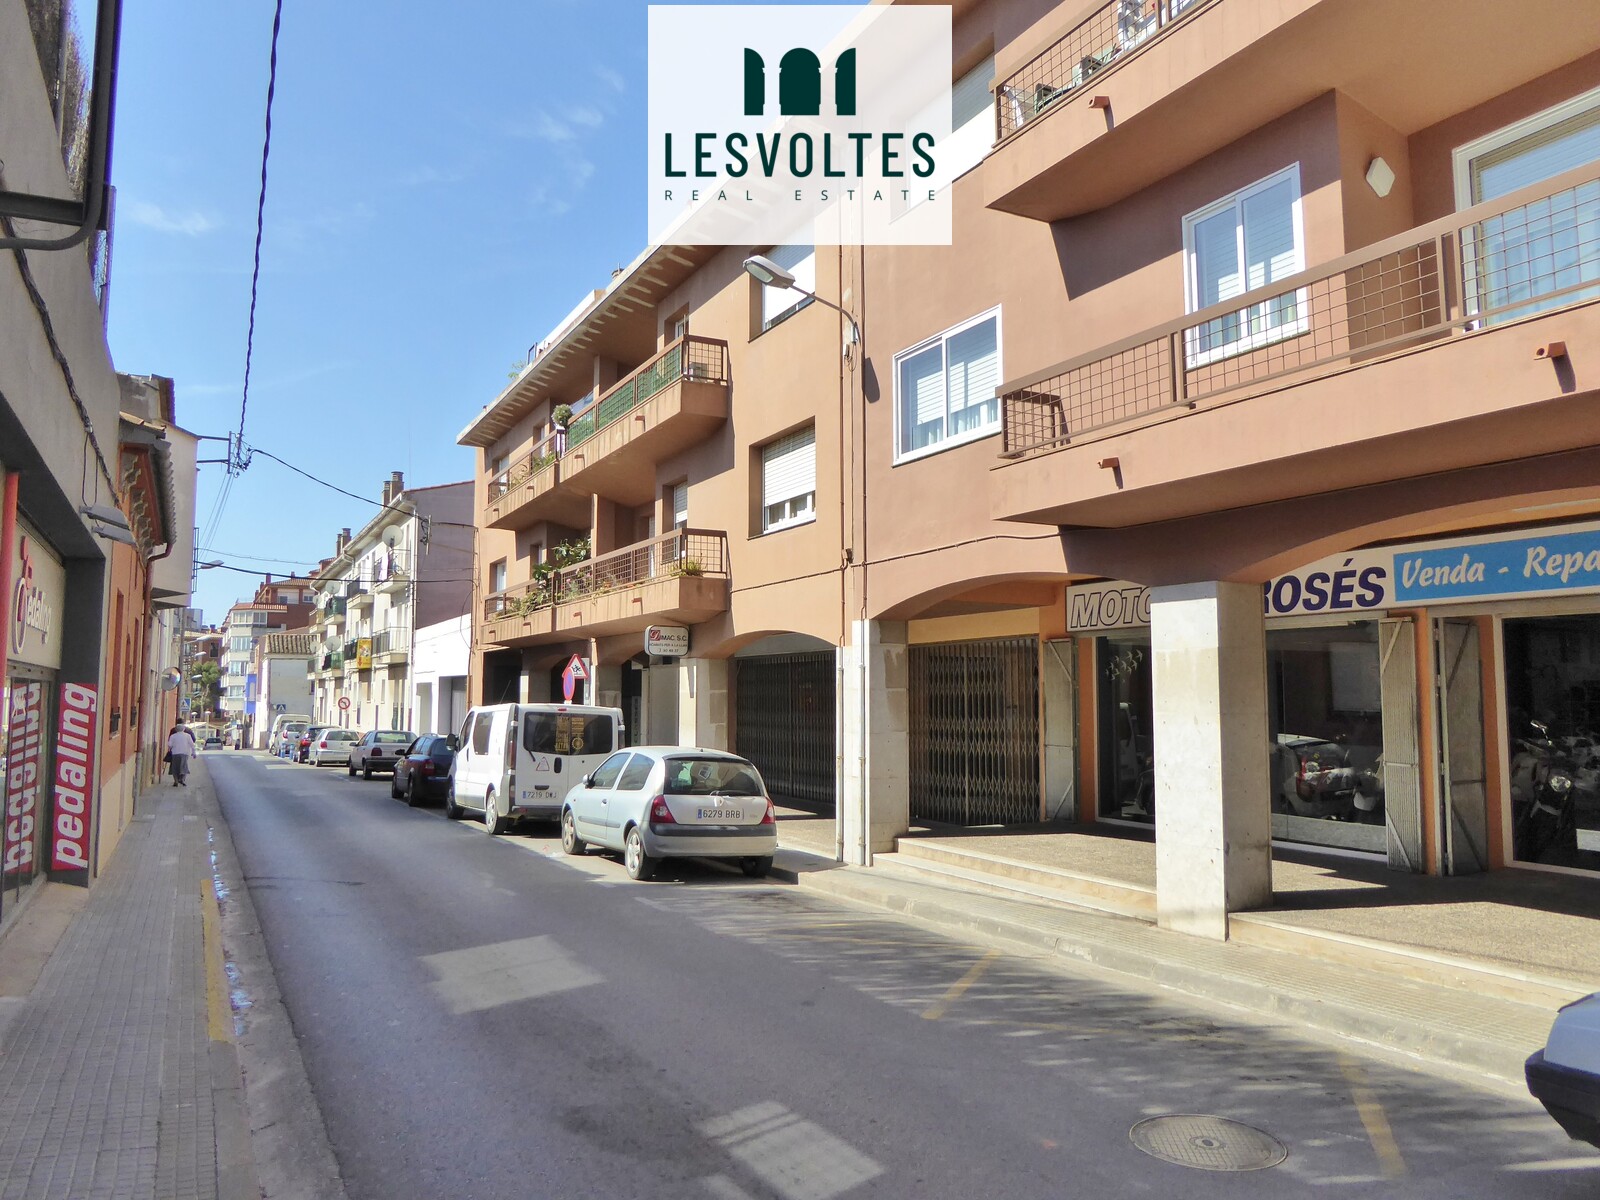 PARKING SPACE FOR SALE IN THE CENTER OF PALAFRUGELL. EASY ACCESS.